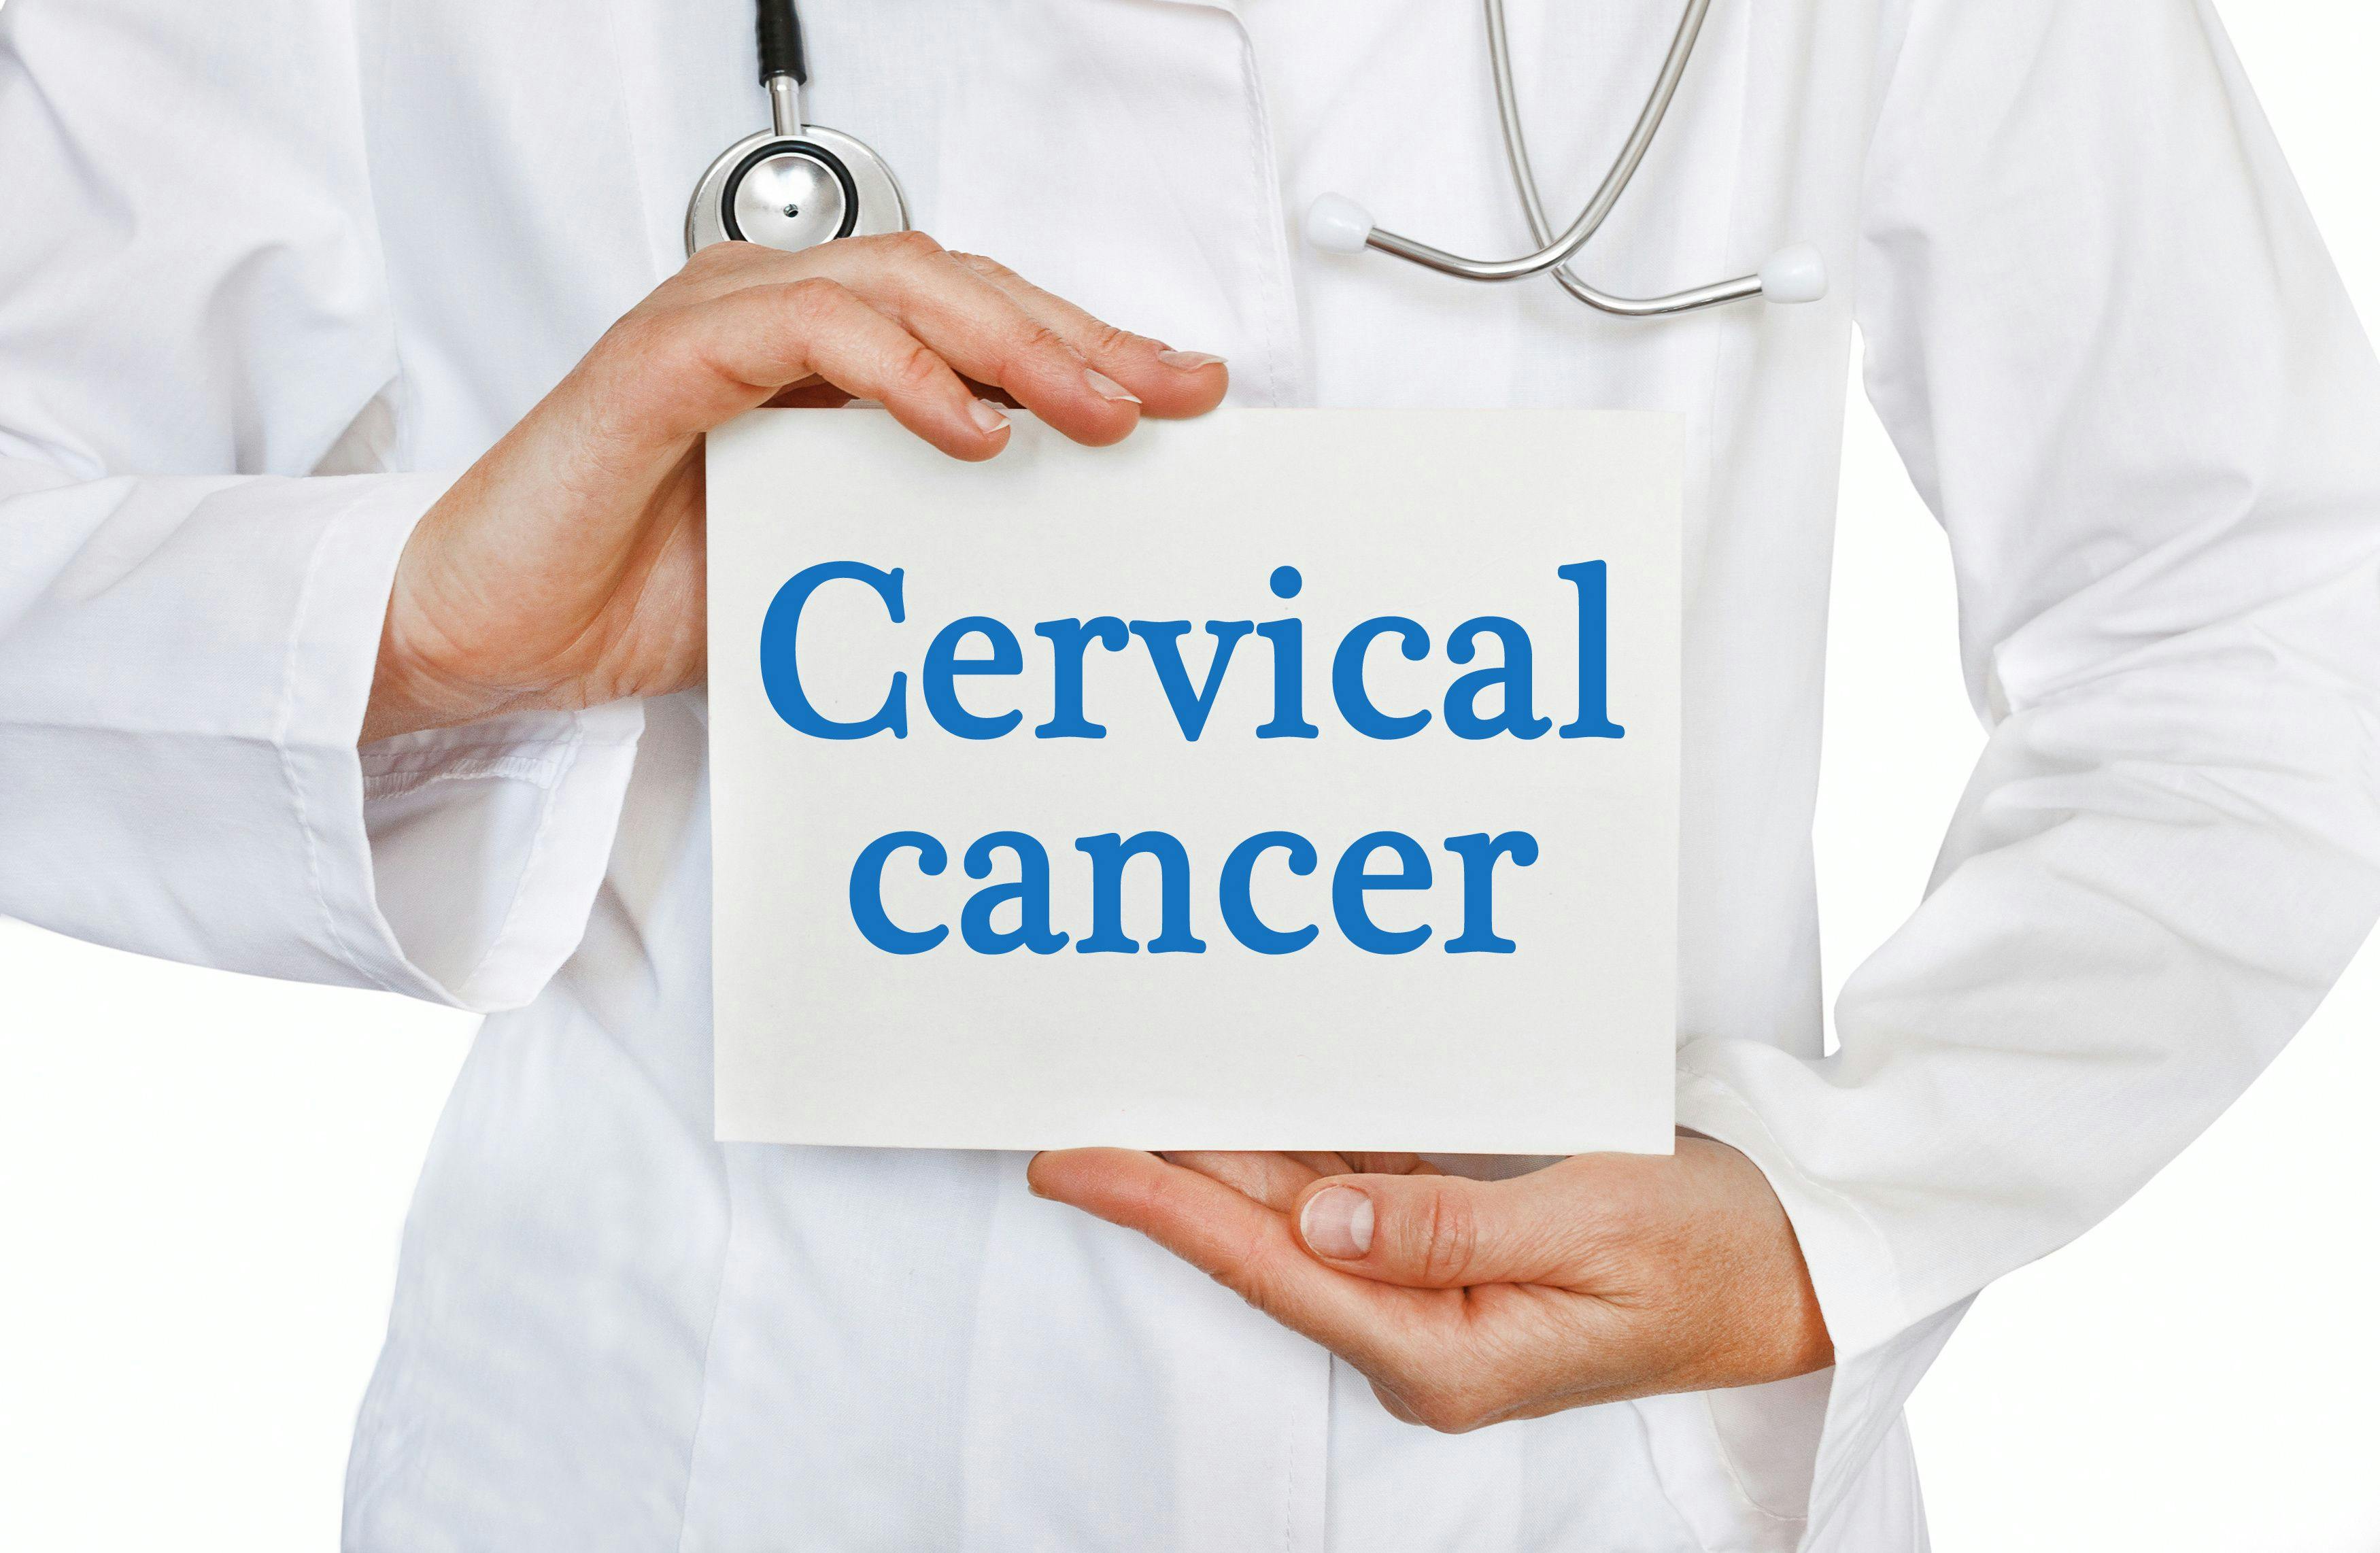 Image of a doctor holding a sign that says "cervical cancer."